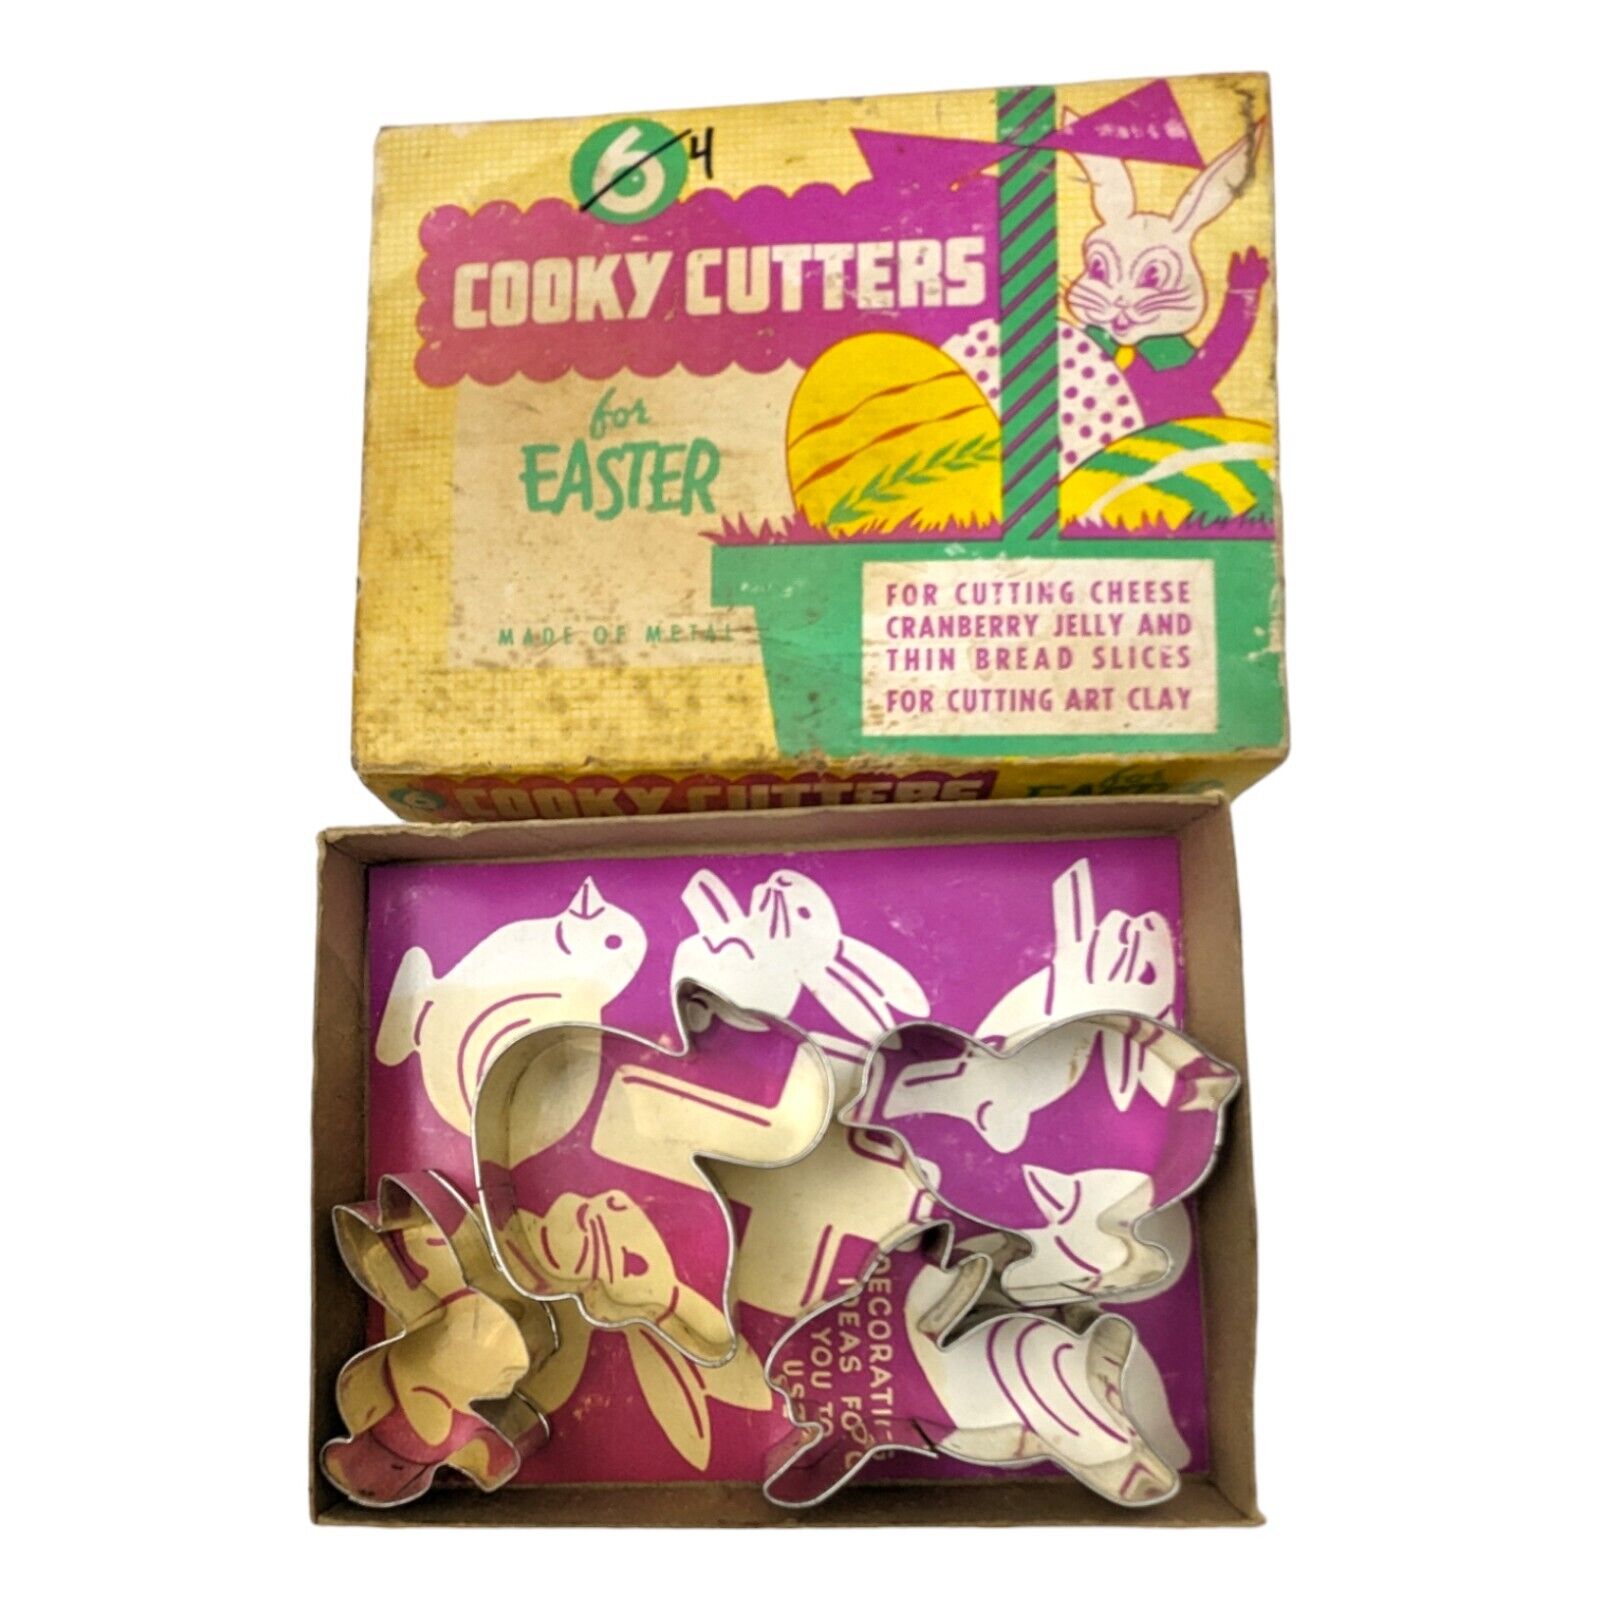 Vintage Easter Cookie Cutters by Cooky Cutters Set Of 4 In Original Box Metal